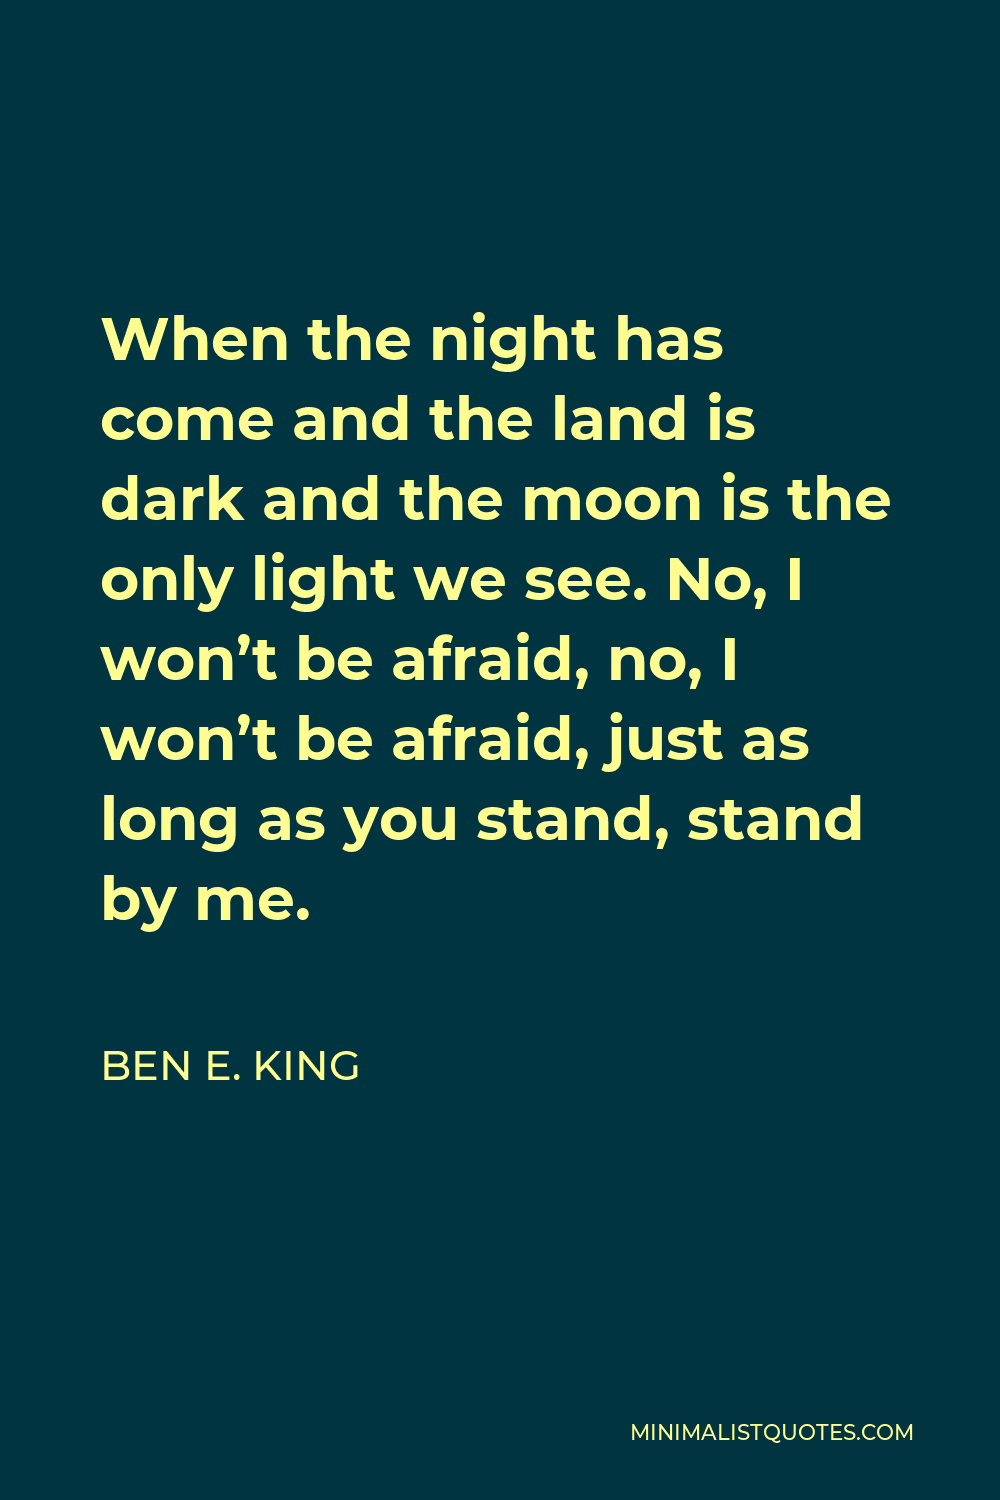 Ben E. King Quote - When the night has come and the land is dark and the moon is the only light we see. No, I won’t be afraid, no, I won’t be afraid, just as long as you stand, stand by me.